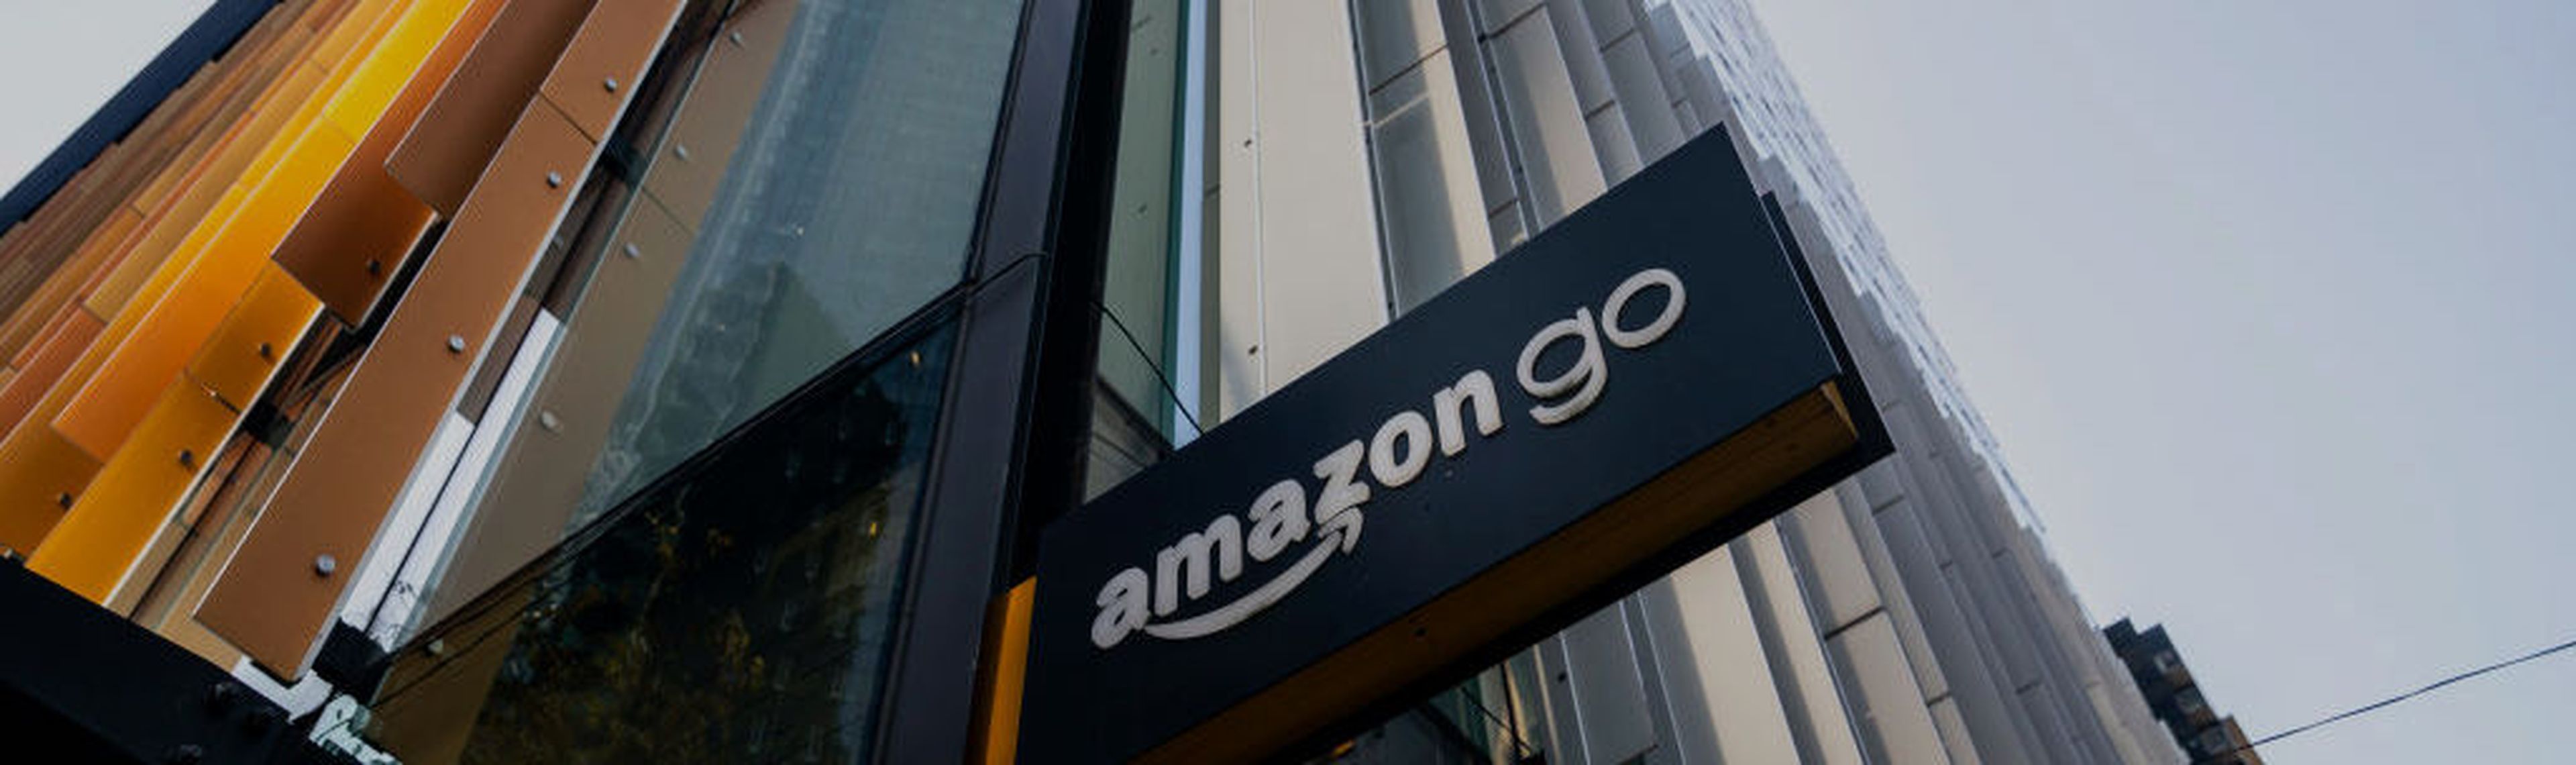 SEATTLE, WA &#8211; NOVEMBER 14: A sign for an Amazon Go retail store is seen at the Amazon.com Inc. headquarters on November 14, 2022 in Seattle, Washington. Large scale layoffs are expected at the tech giant this week. (Photo by David Ryder/Getty Images)